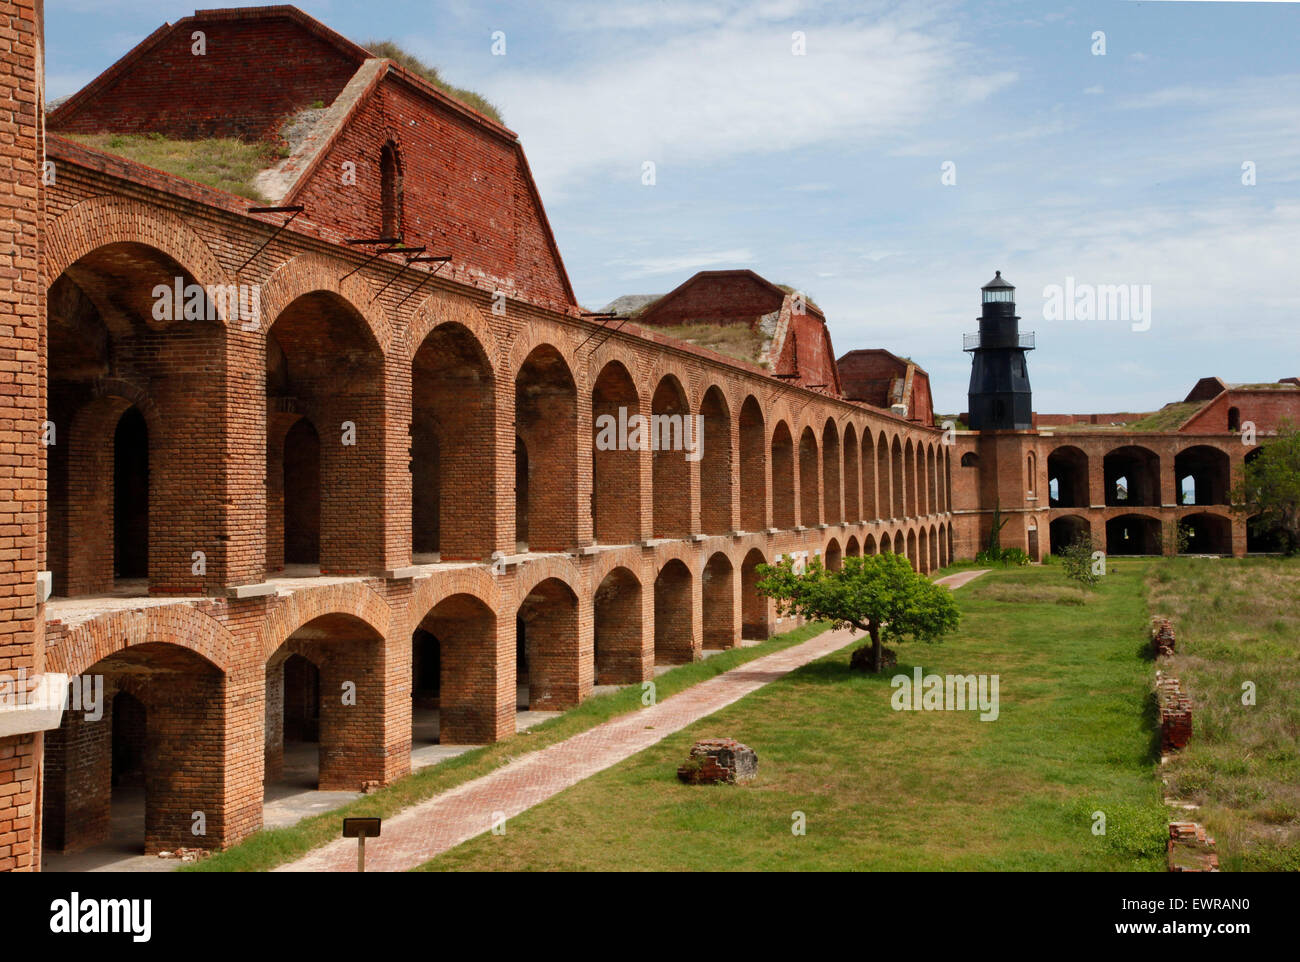 Dry Tortugas National Park is home to extensive coral reefs, beaches and the historic Fort Jefferson. Stock Photo